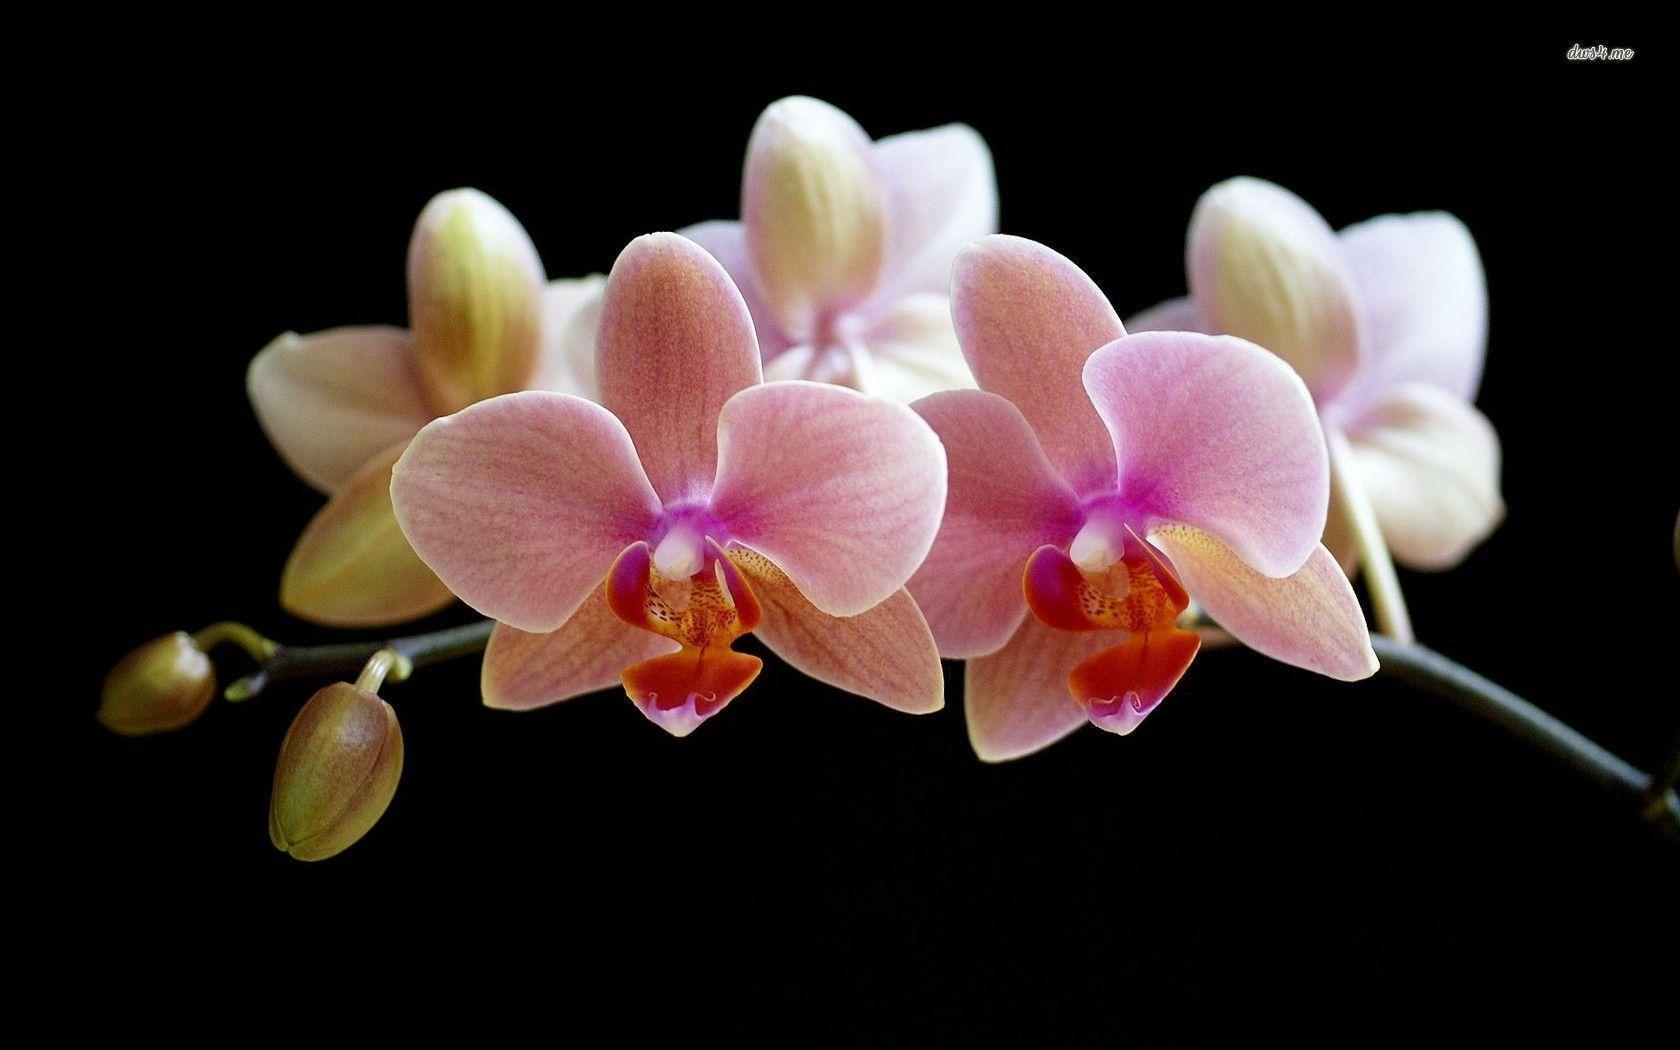 Orchid Wallpaper For Android Wallpaper. Wallshed